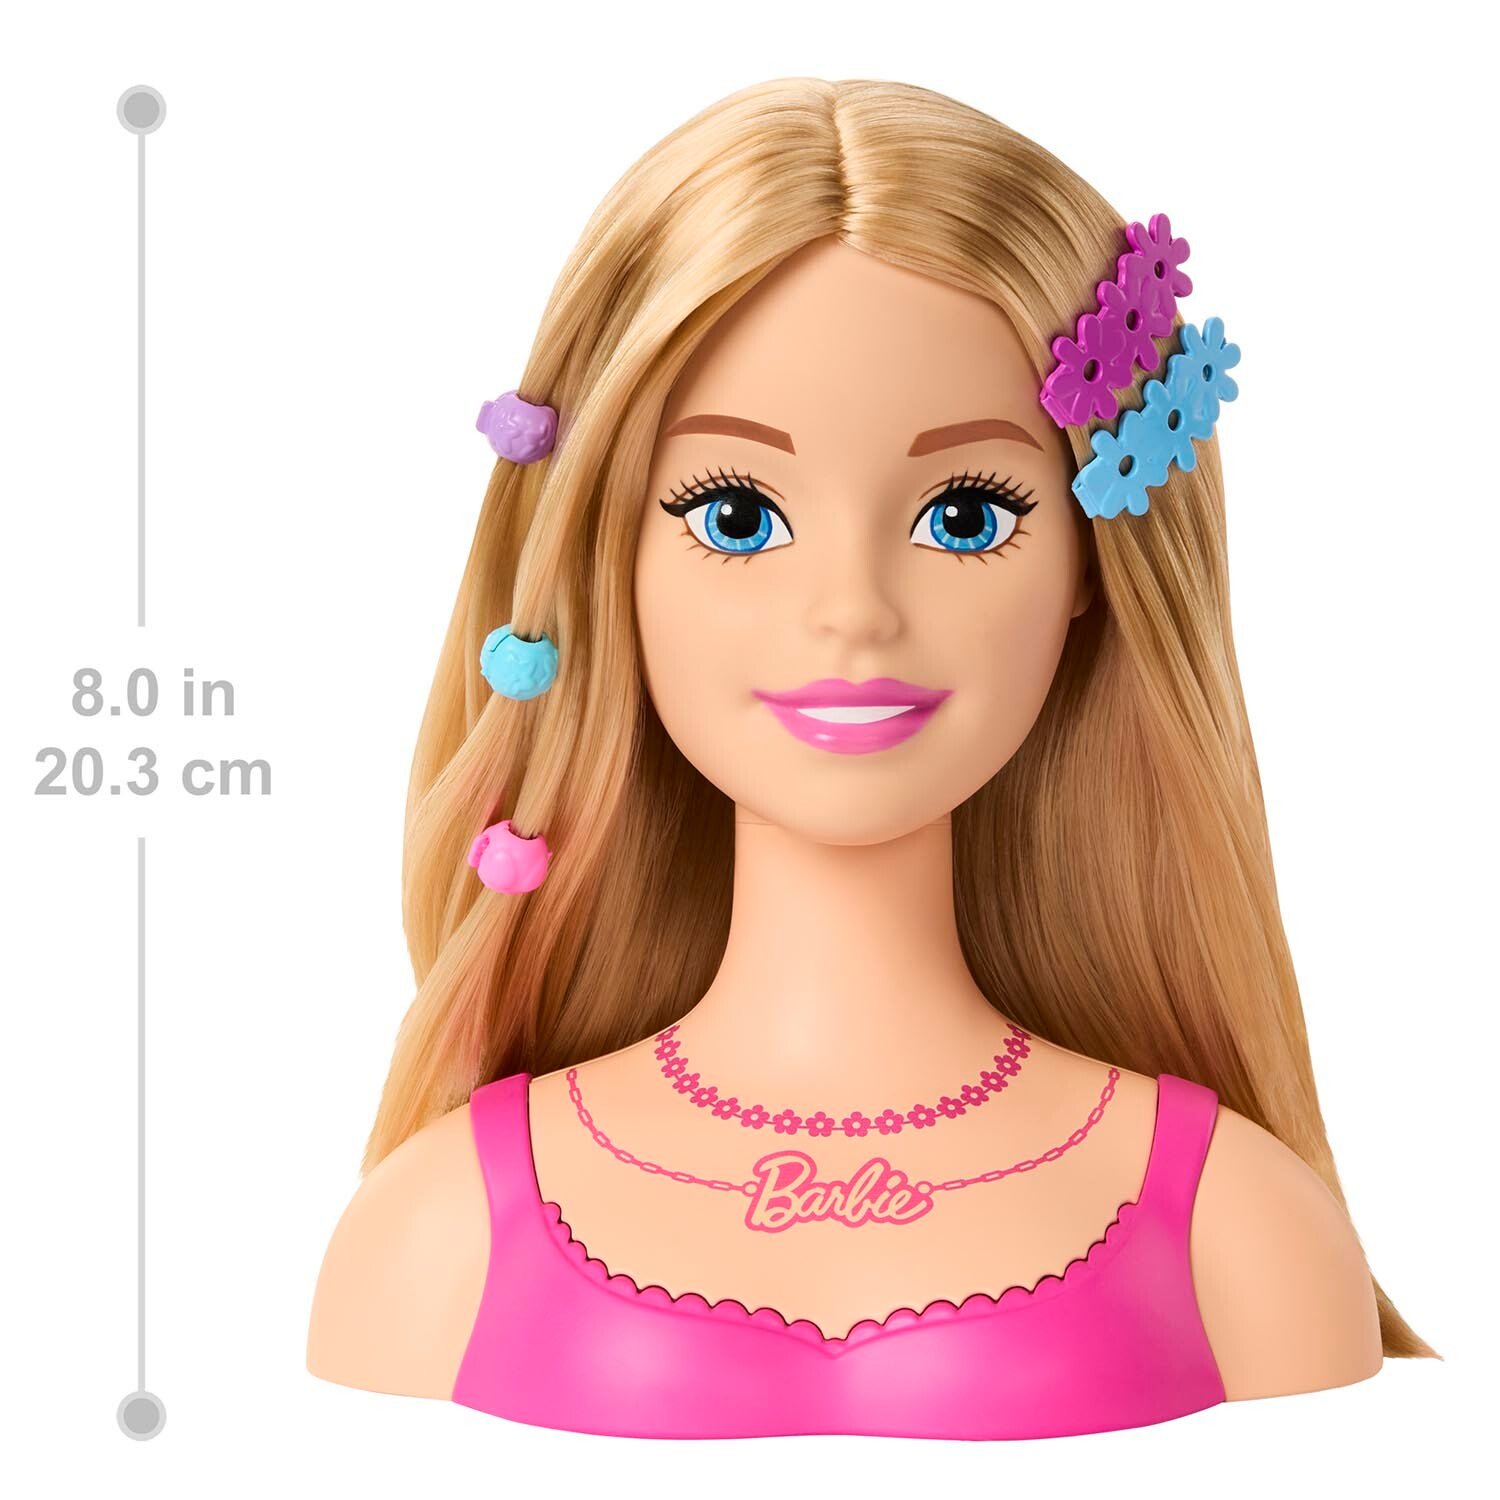 Barbie Styling Head and Accessories - Pink Image 6